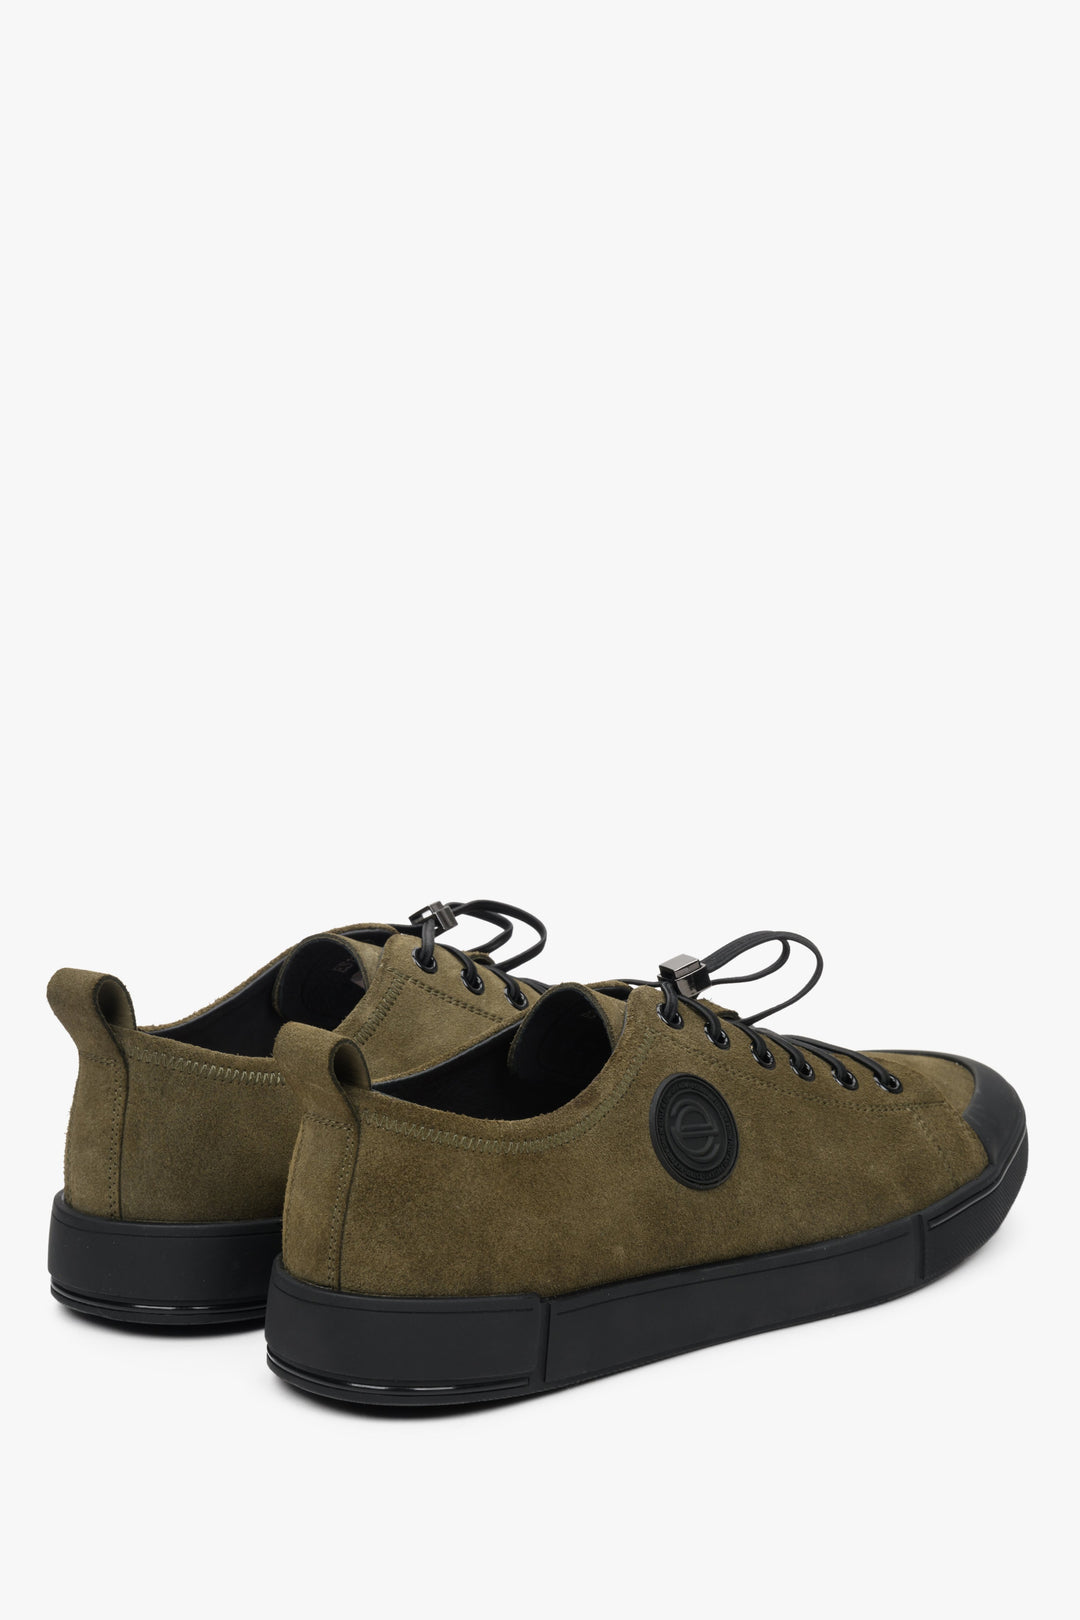 Men's Estro sneakers made of green genuine leather - presentation of the heel and side seam of the shoe.